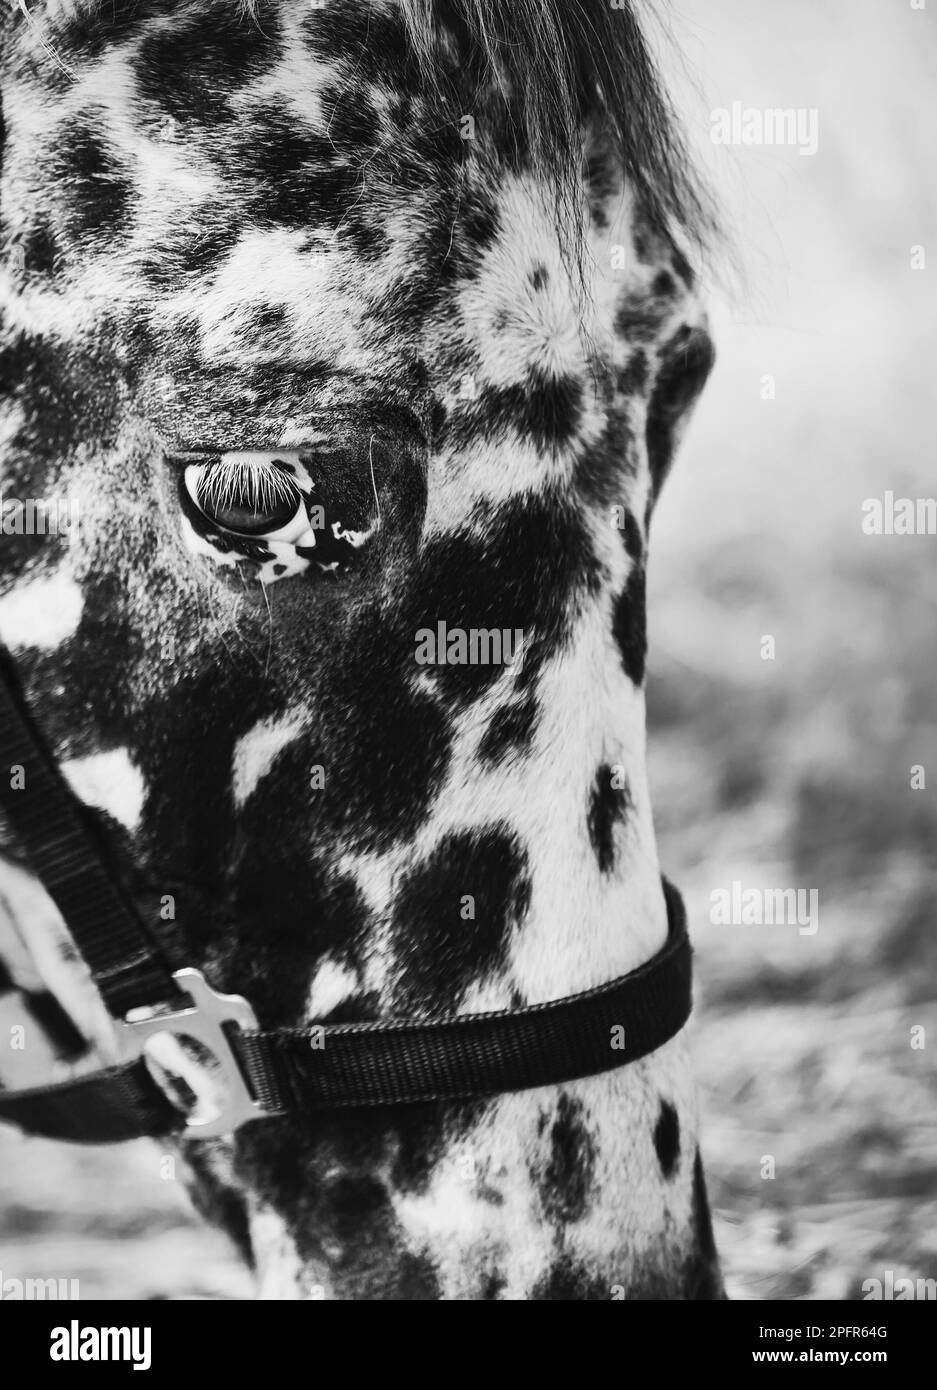 A black-and-white portrait of a spotted horse eating hay on a farm. Agriculture and livestock. Horse care. Stock Photo